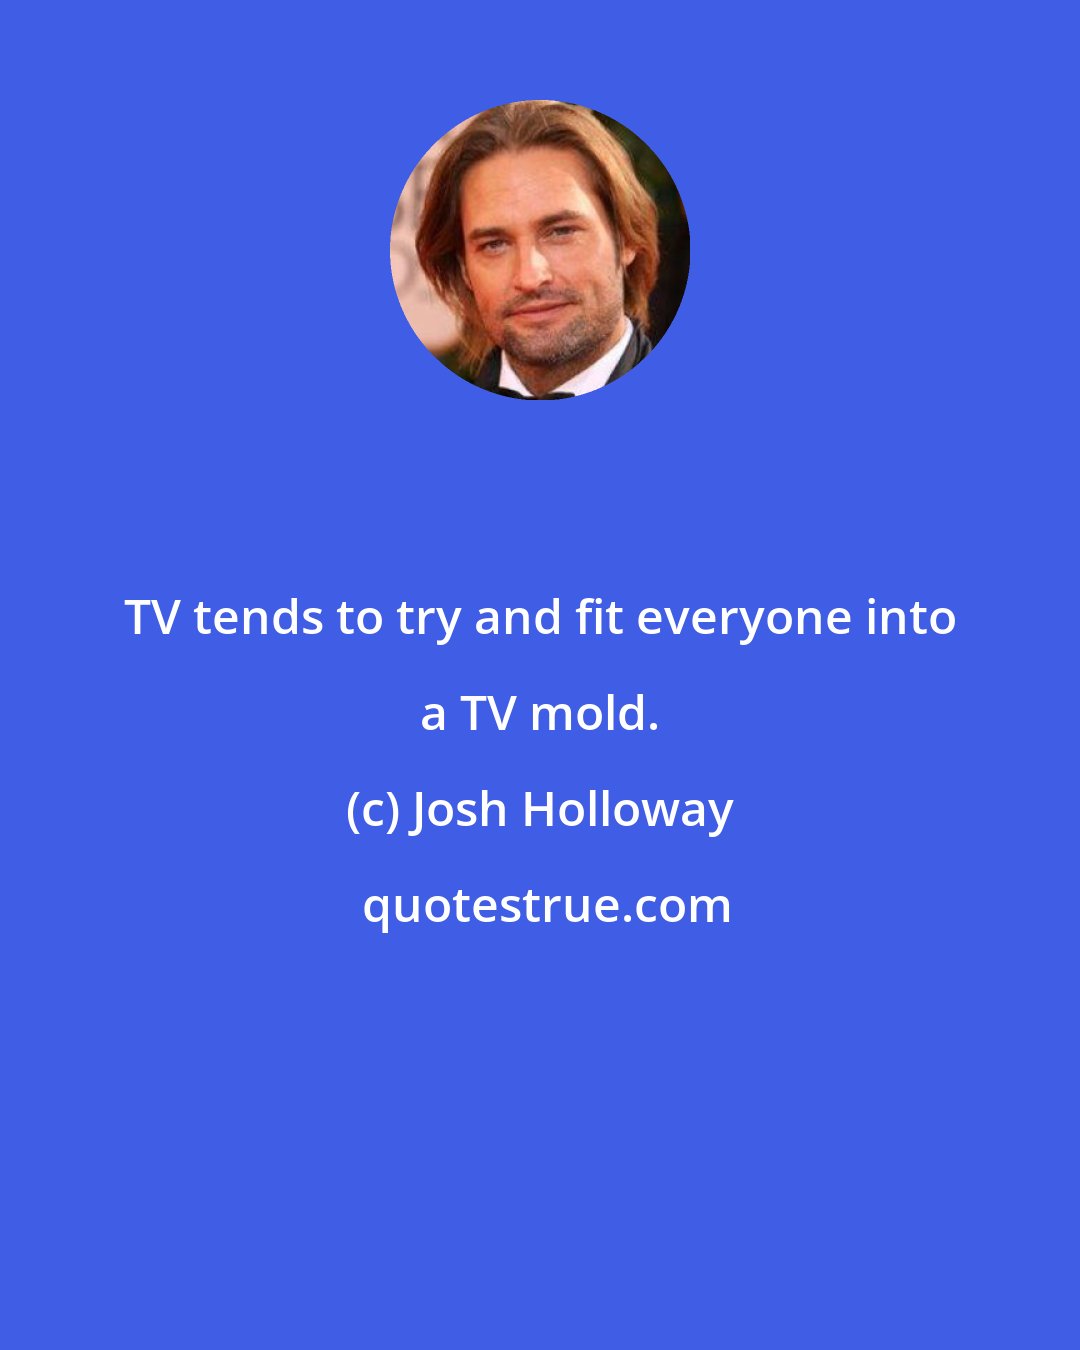 Josh Holloway: TV tends to try and fit everyone into a TV mold.